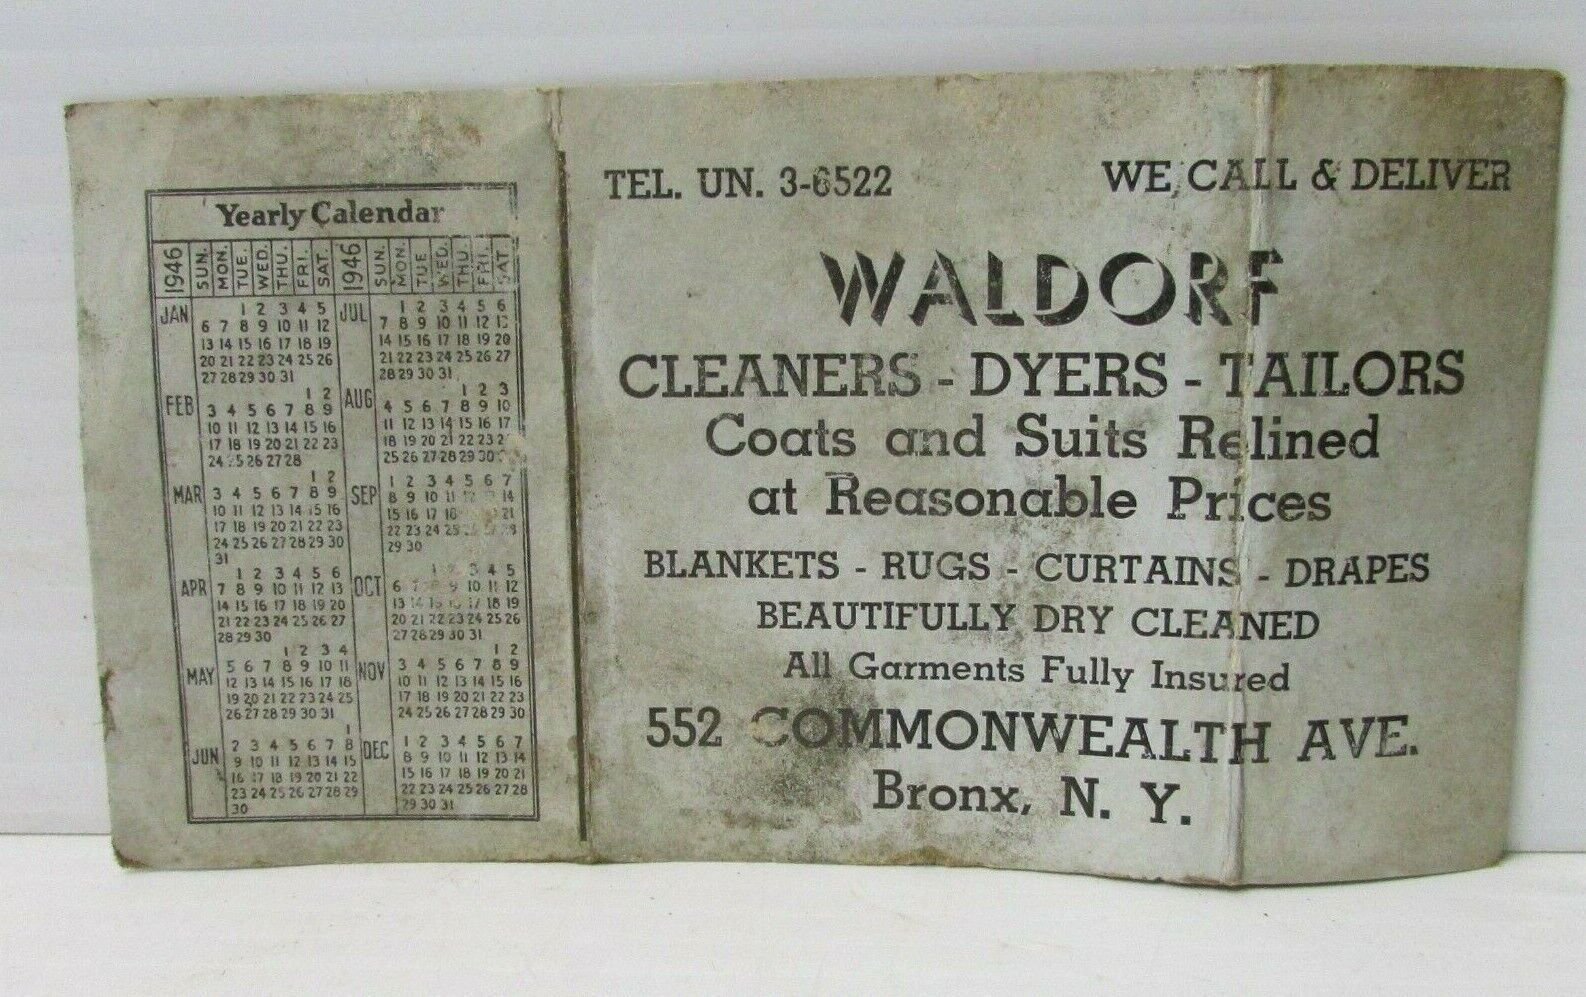 1954 WALDORF Cleaners - Dyers - Tailors Flyers w/Year Calendar